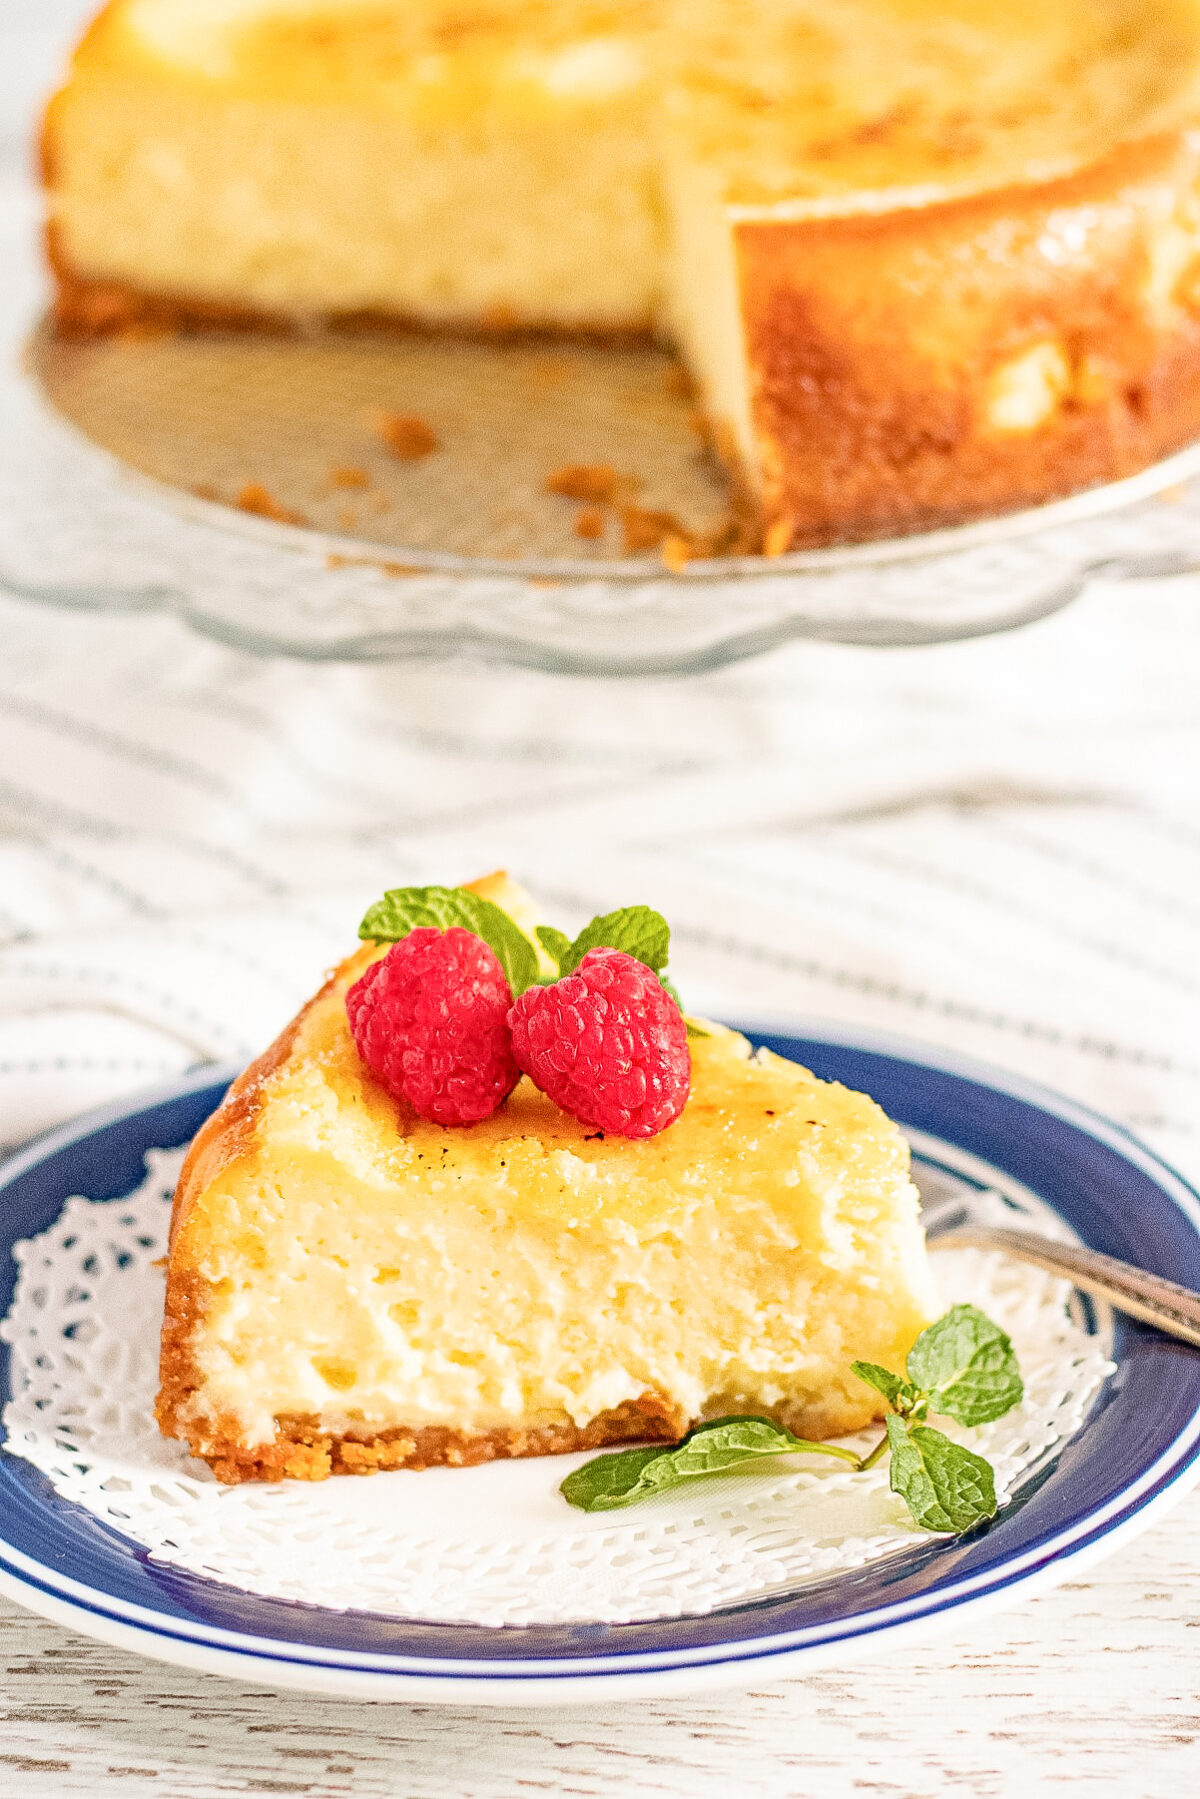 Delicious and creamy cheesecake made easy with your Instant Pot, just try this decadent instant pot crème brûlée cheesecake recipe now!